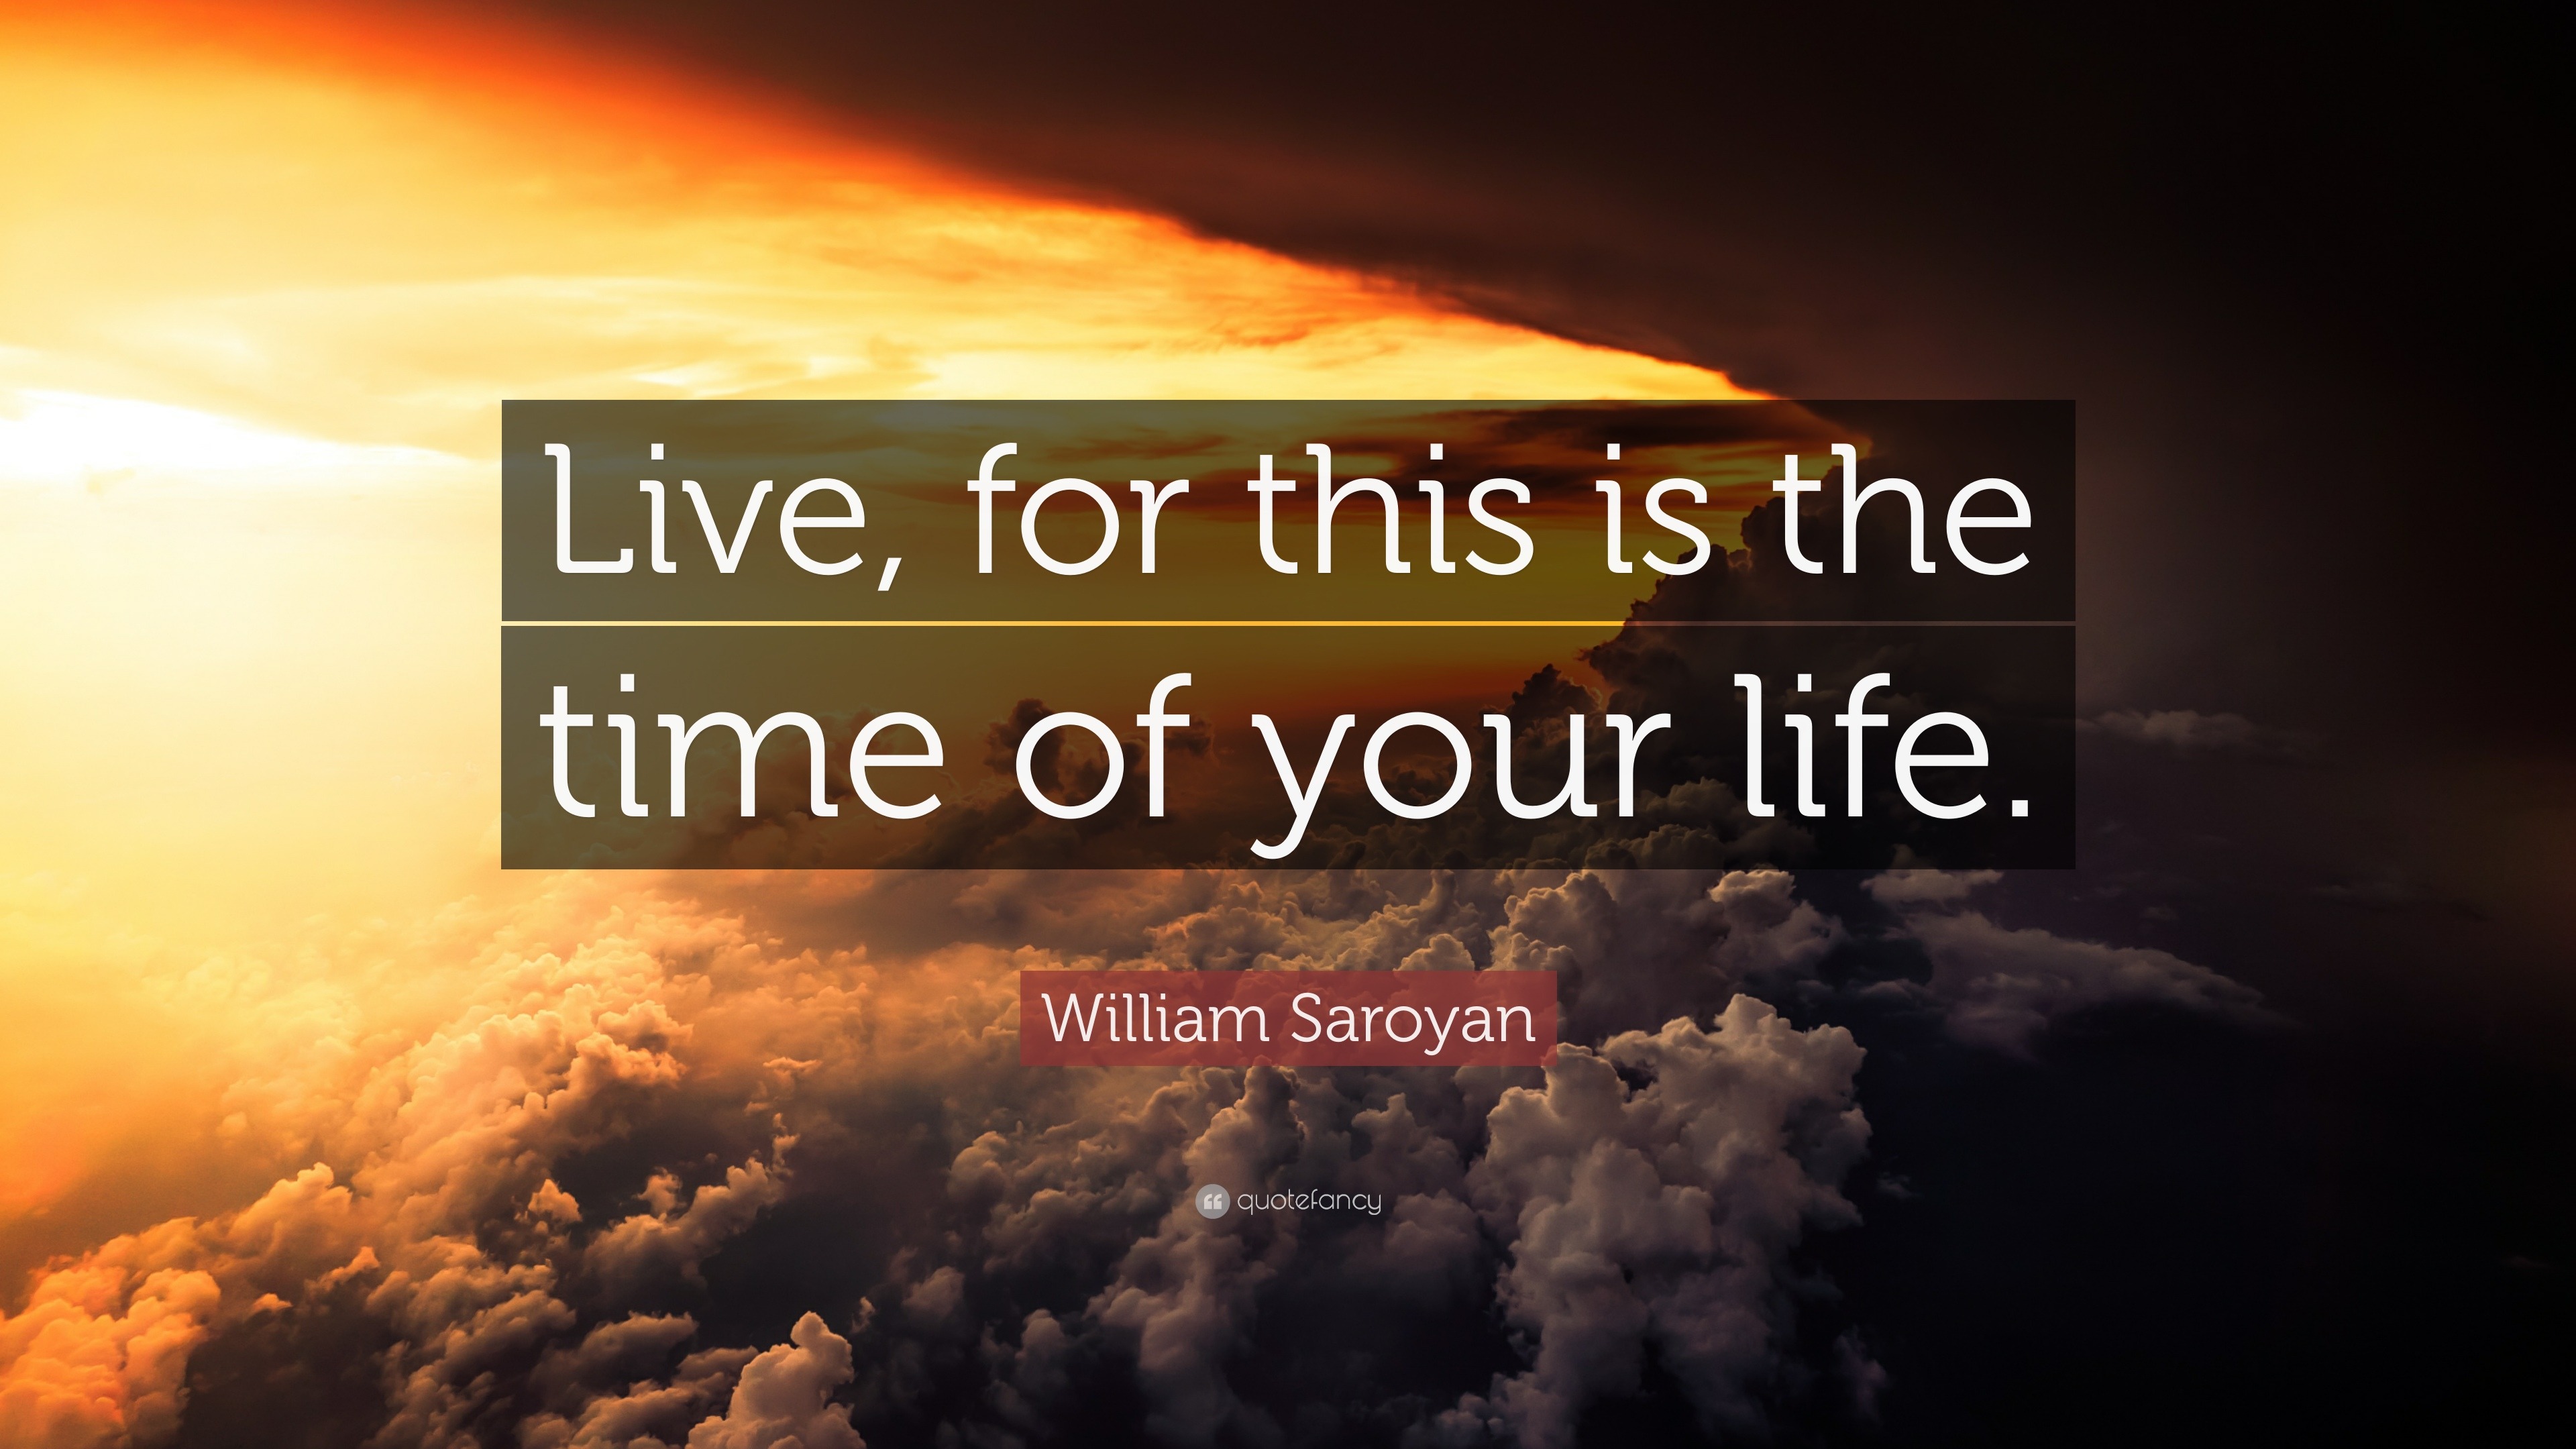 William Saroyan Quote “Live for this is the time of your life